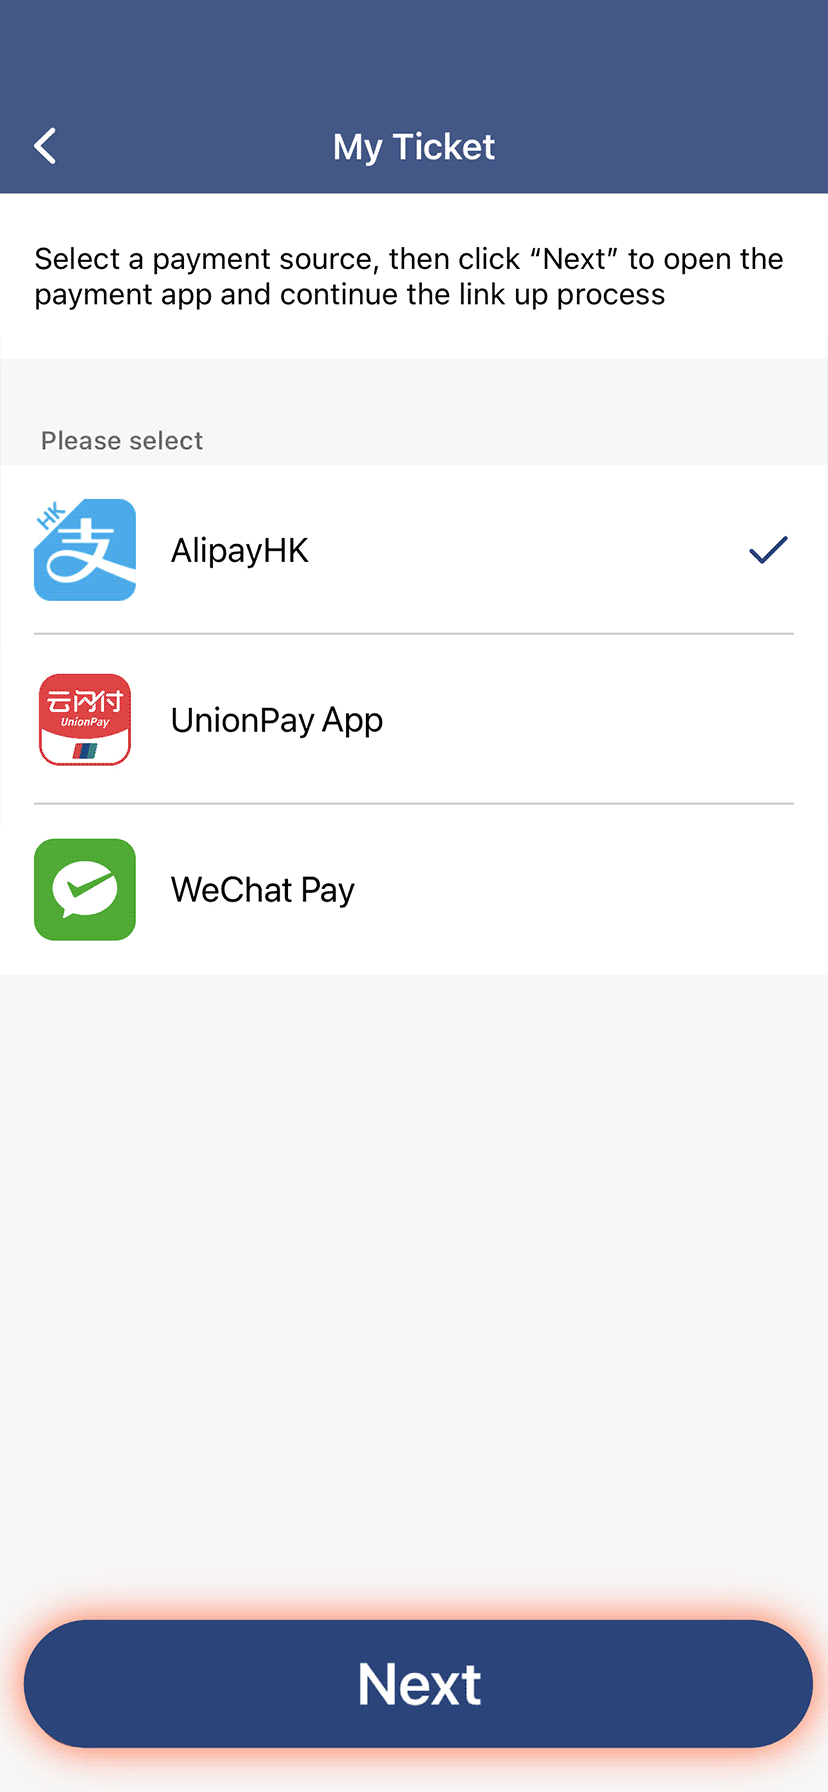 Accept terms and conditions by clicking 'Next'. Tap 'Next' to link an AlipayHK account and you will be redirected to the AlipayHK App.